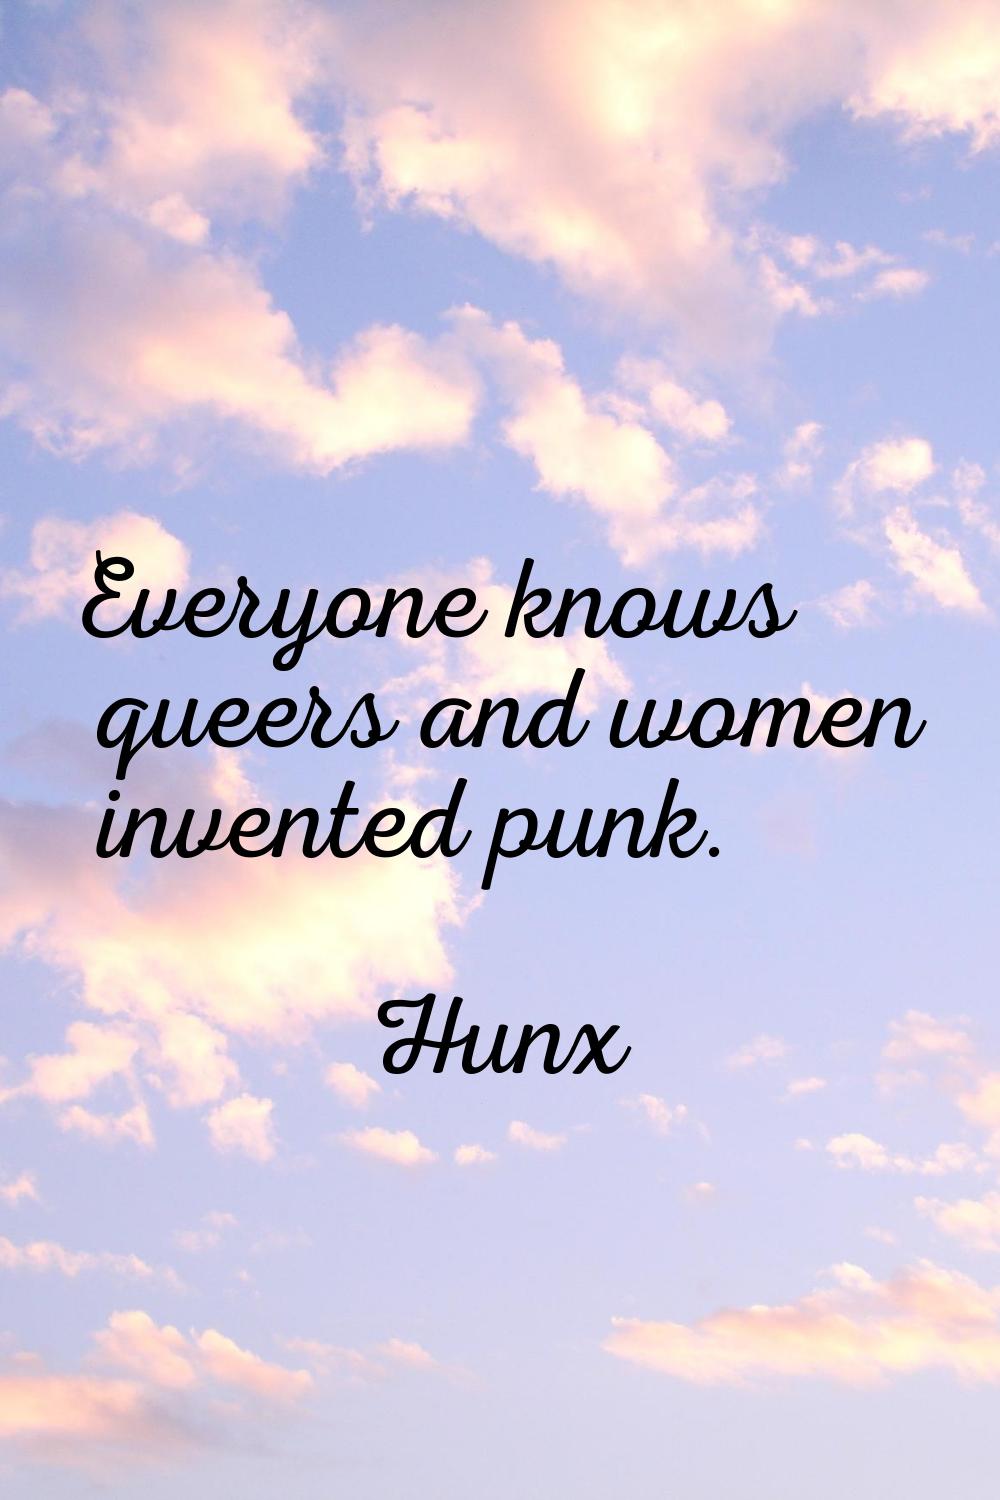 Everyone knows queers and women invented punk.